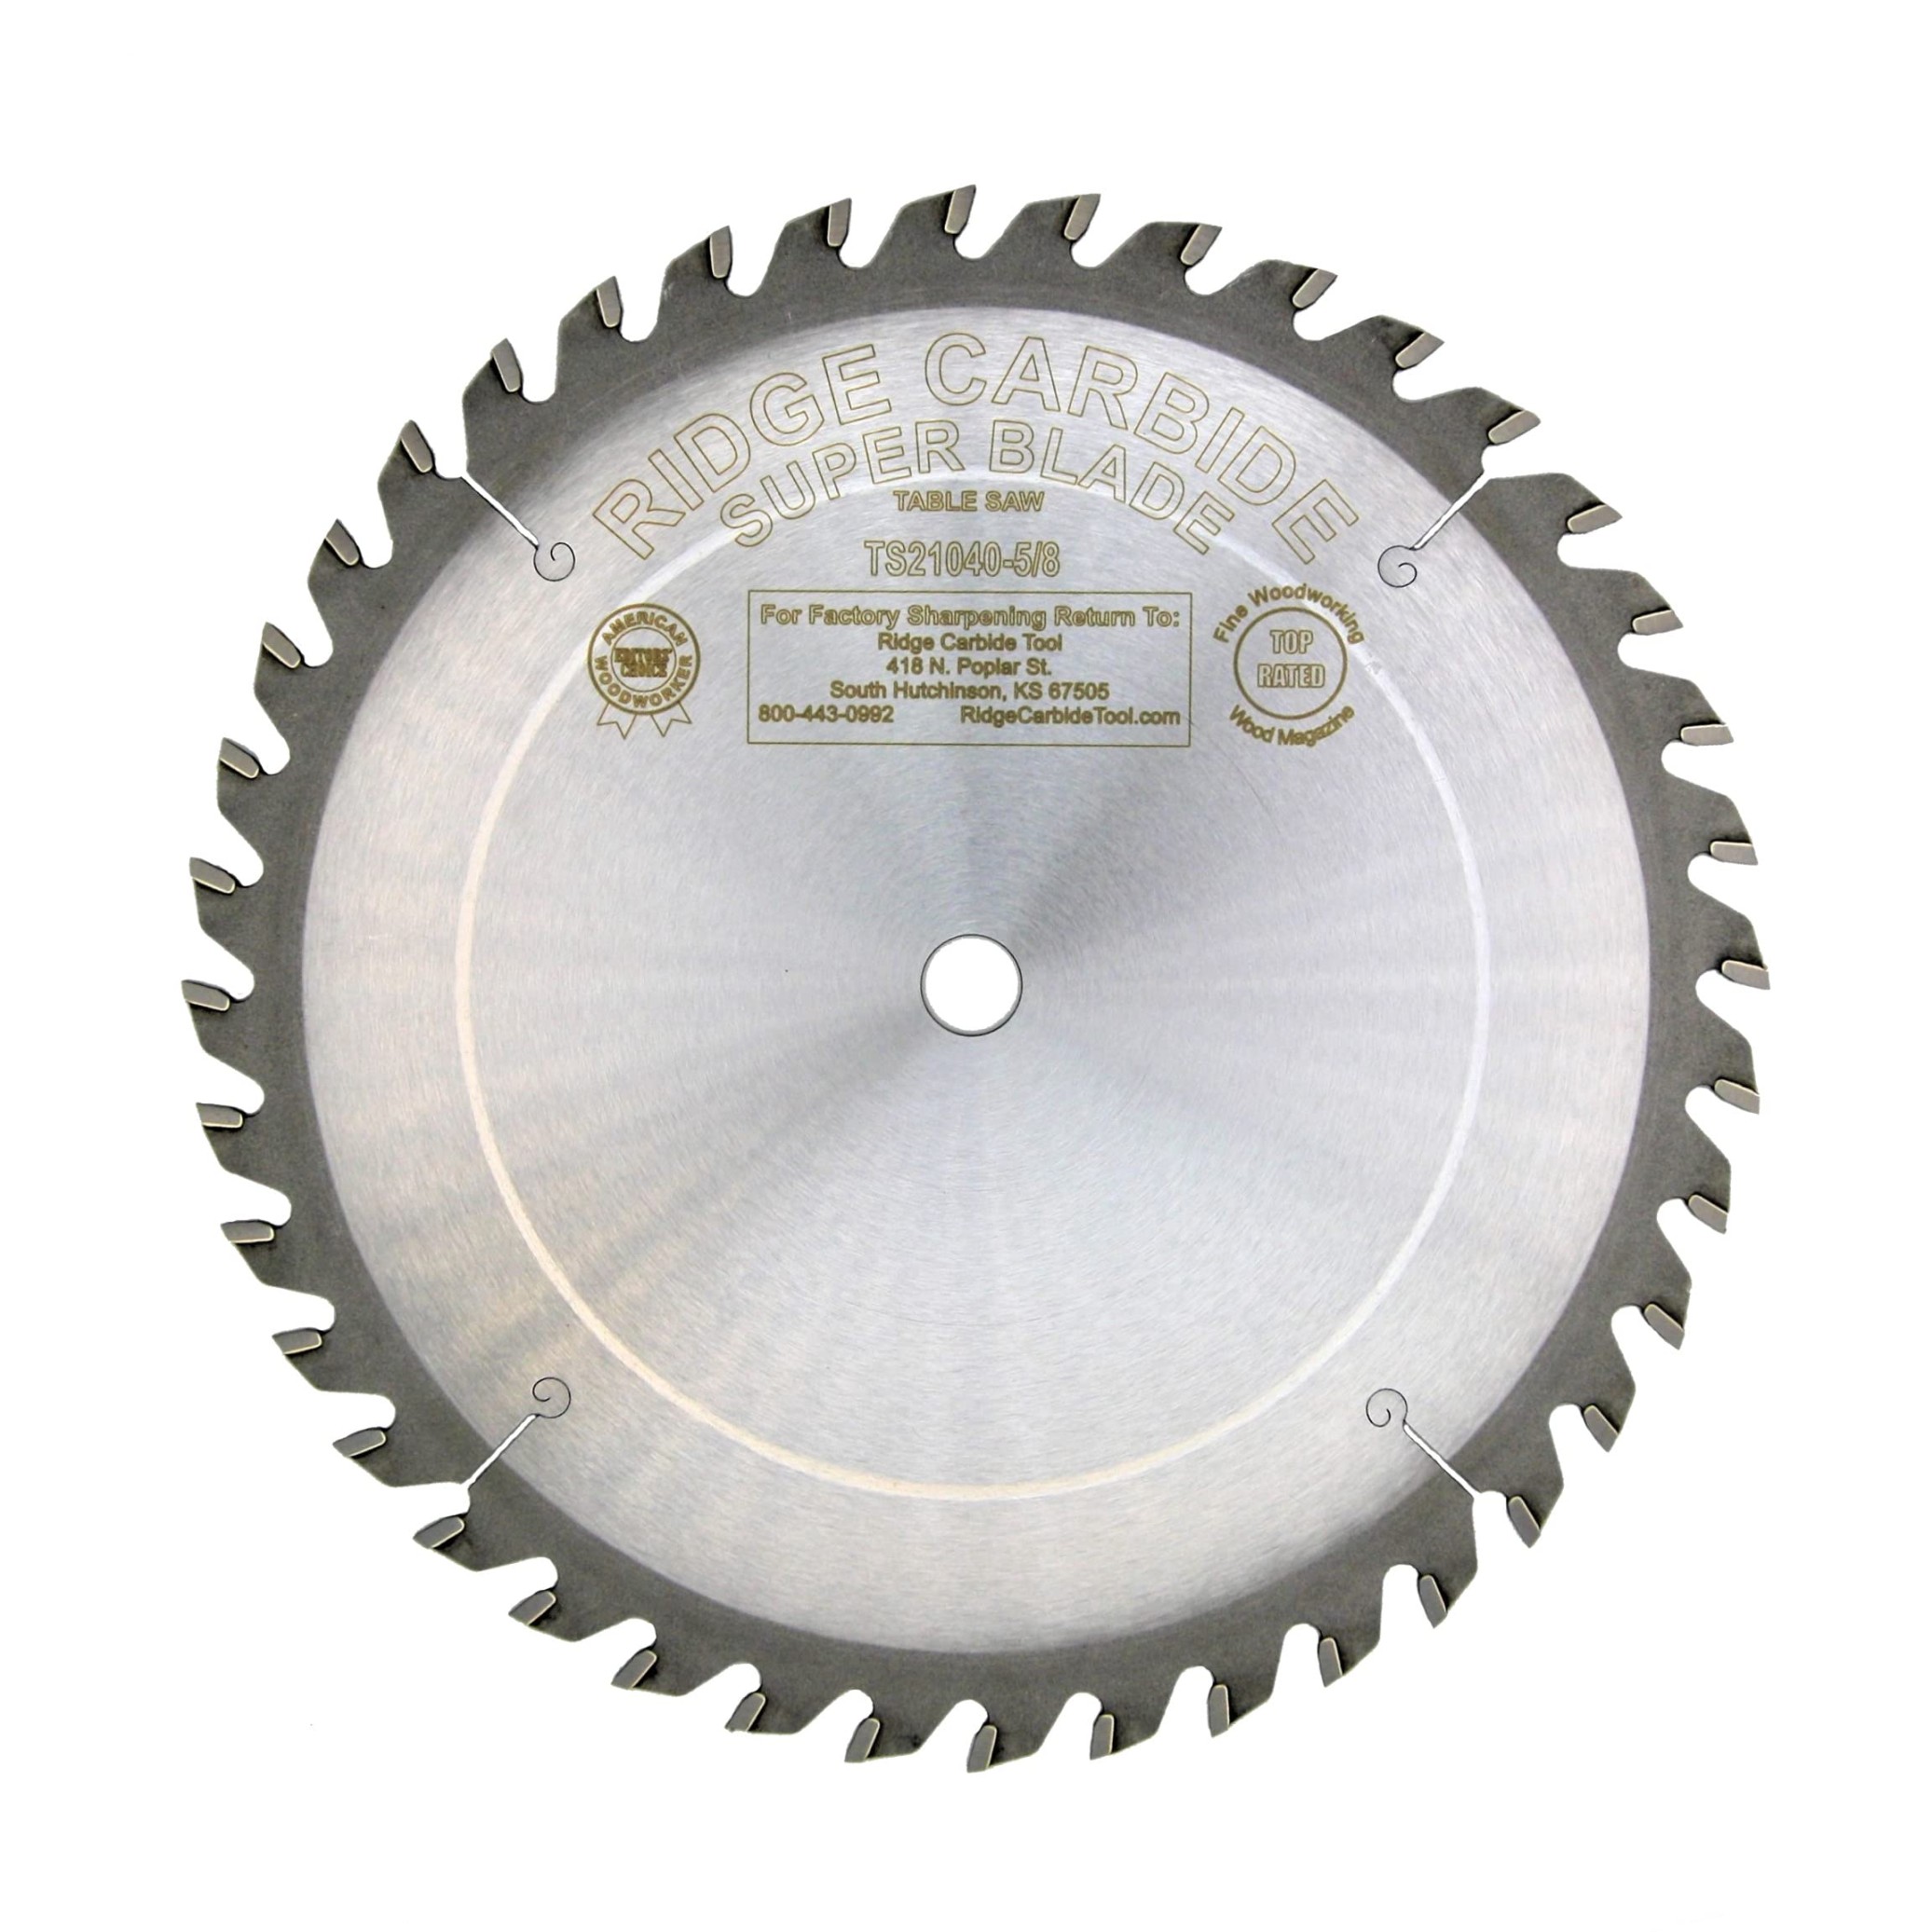 ridge-carbide-ts-super-table-saw-blade-tooth-atb-r 10 Table Saw Blade Reviews for the Discerning Woodworker picture